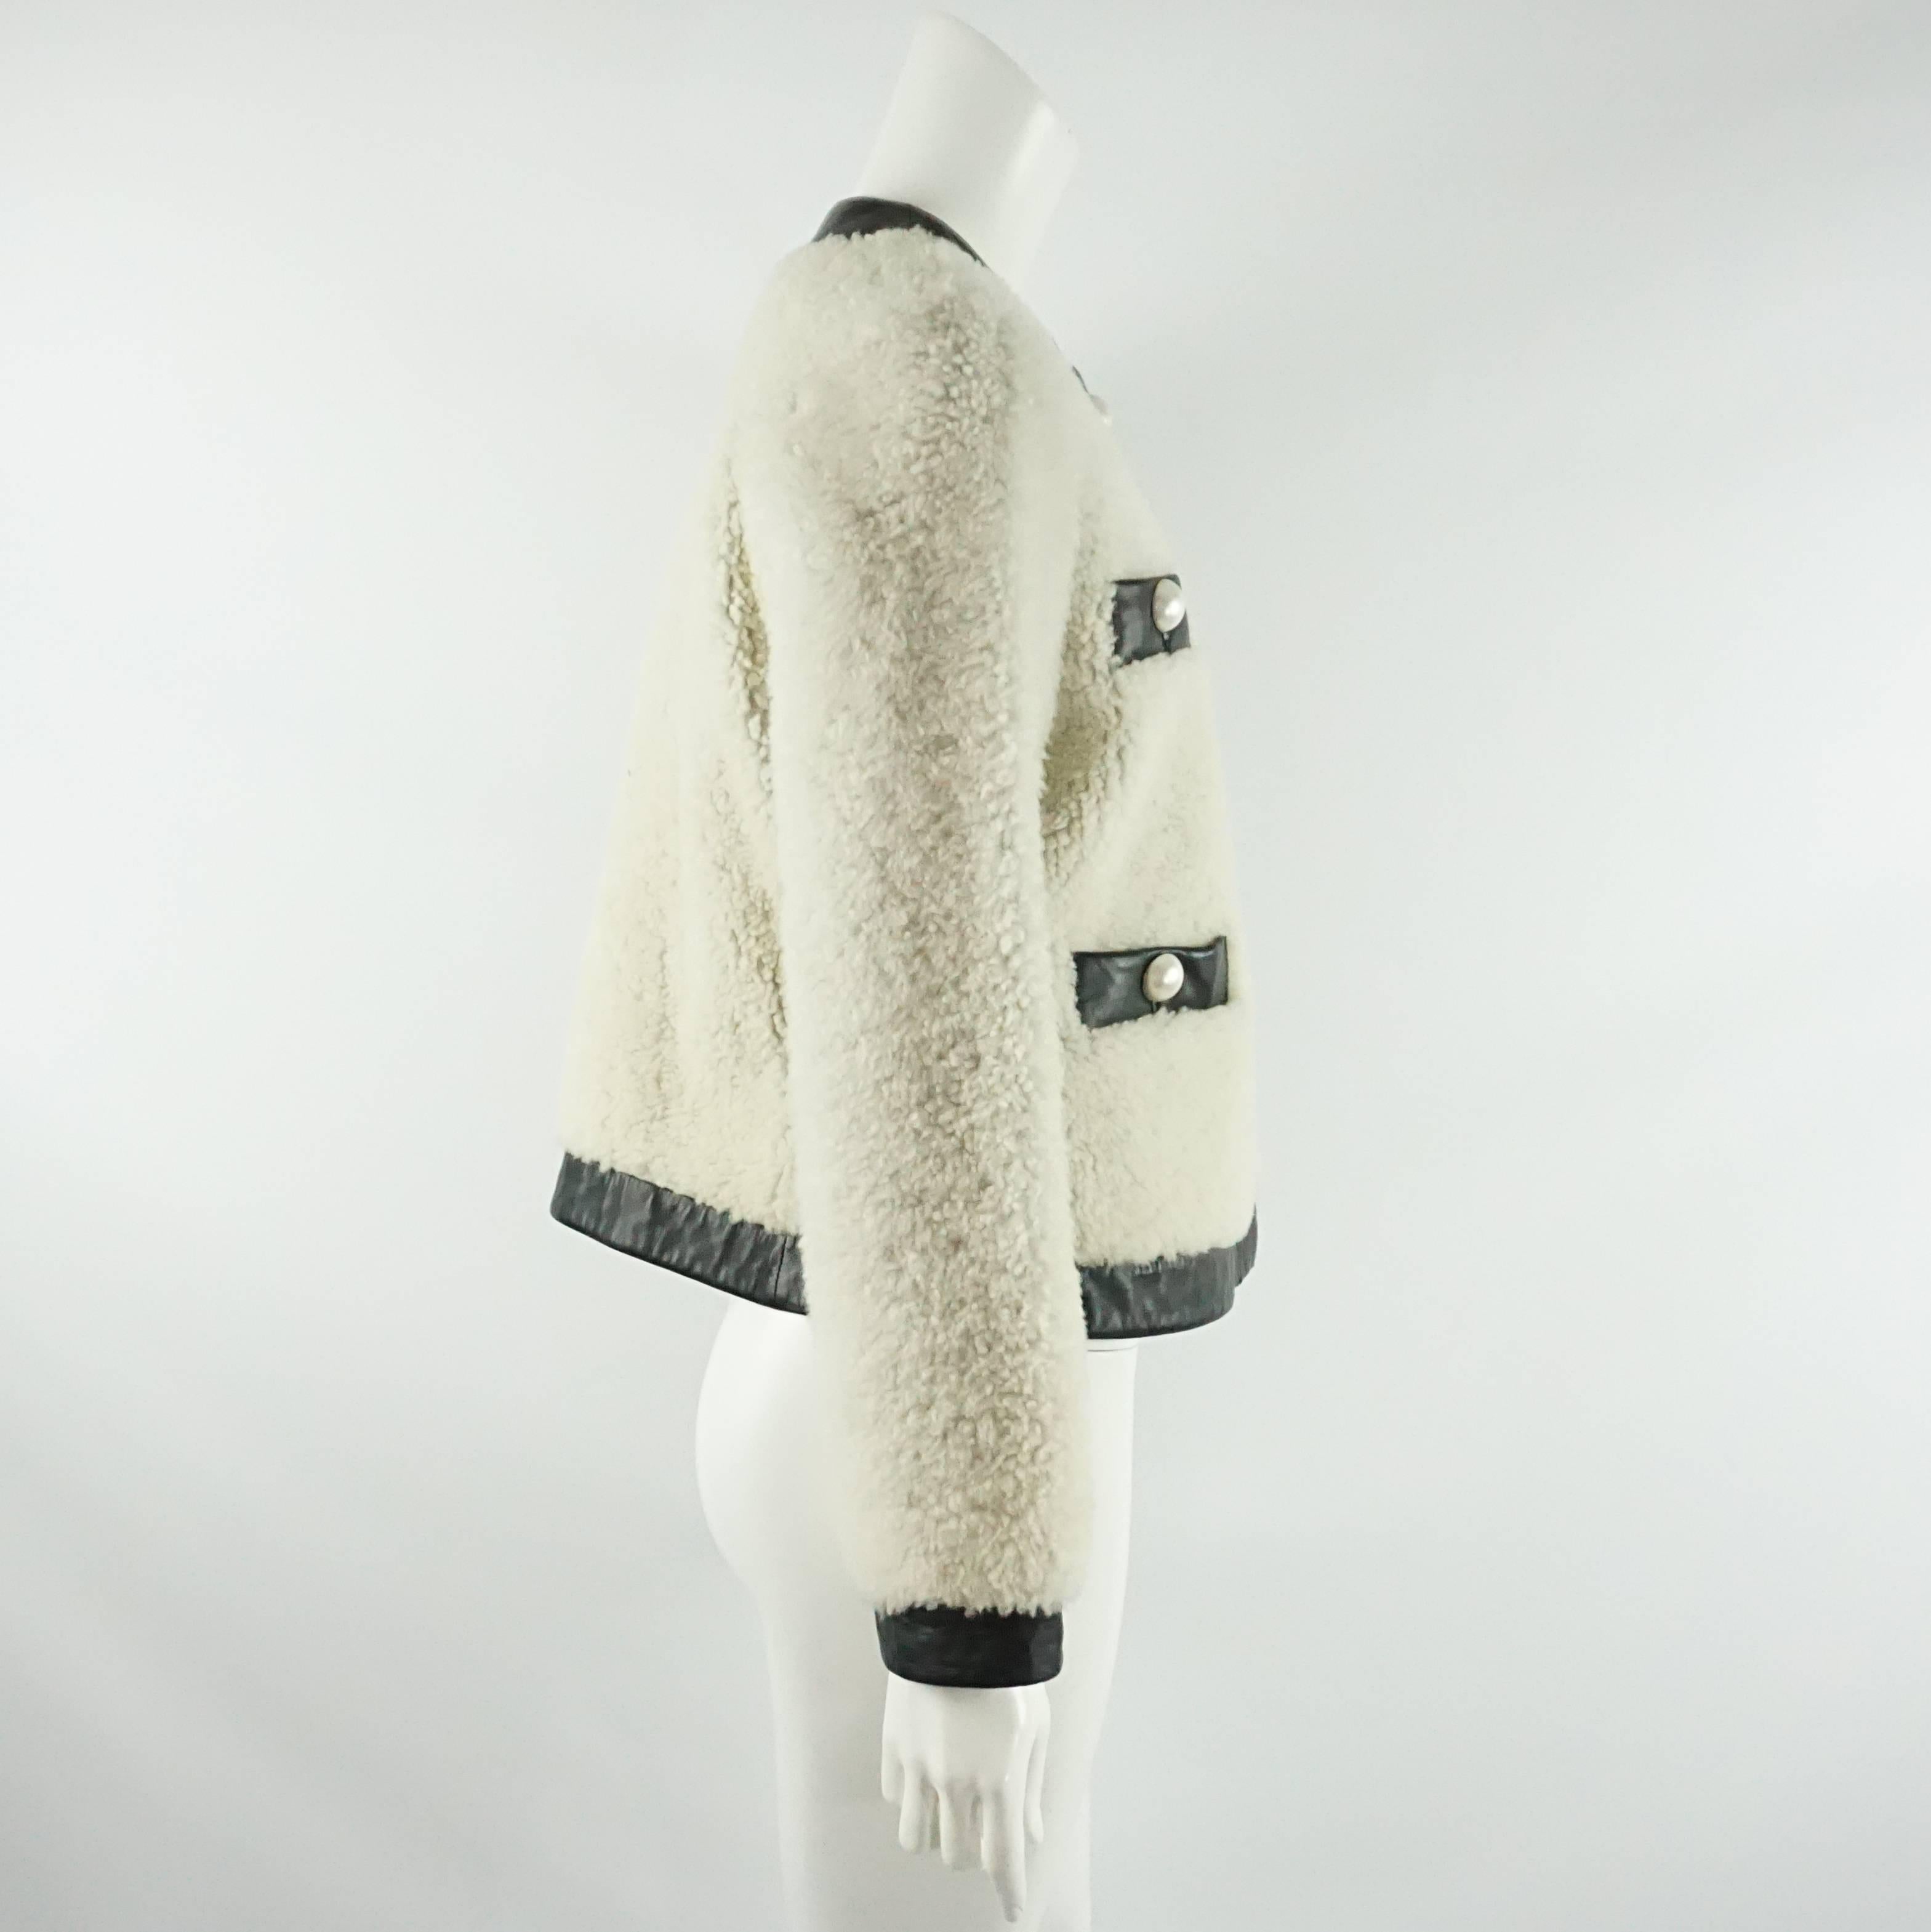 This Moschino Cheap & Chic ivory shearling jacket (sheep fur from Spain) and is fully trimmed in 1.75